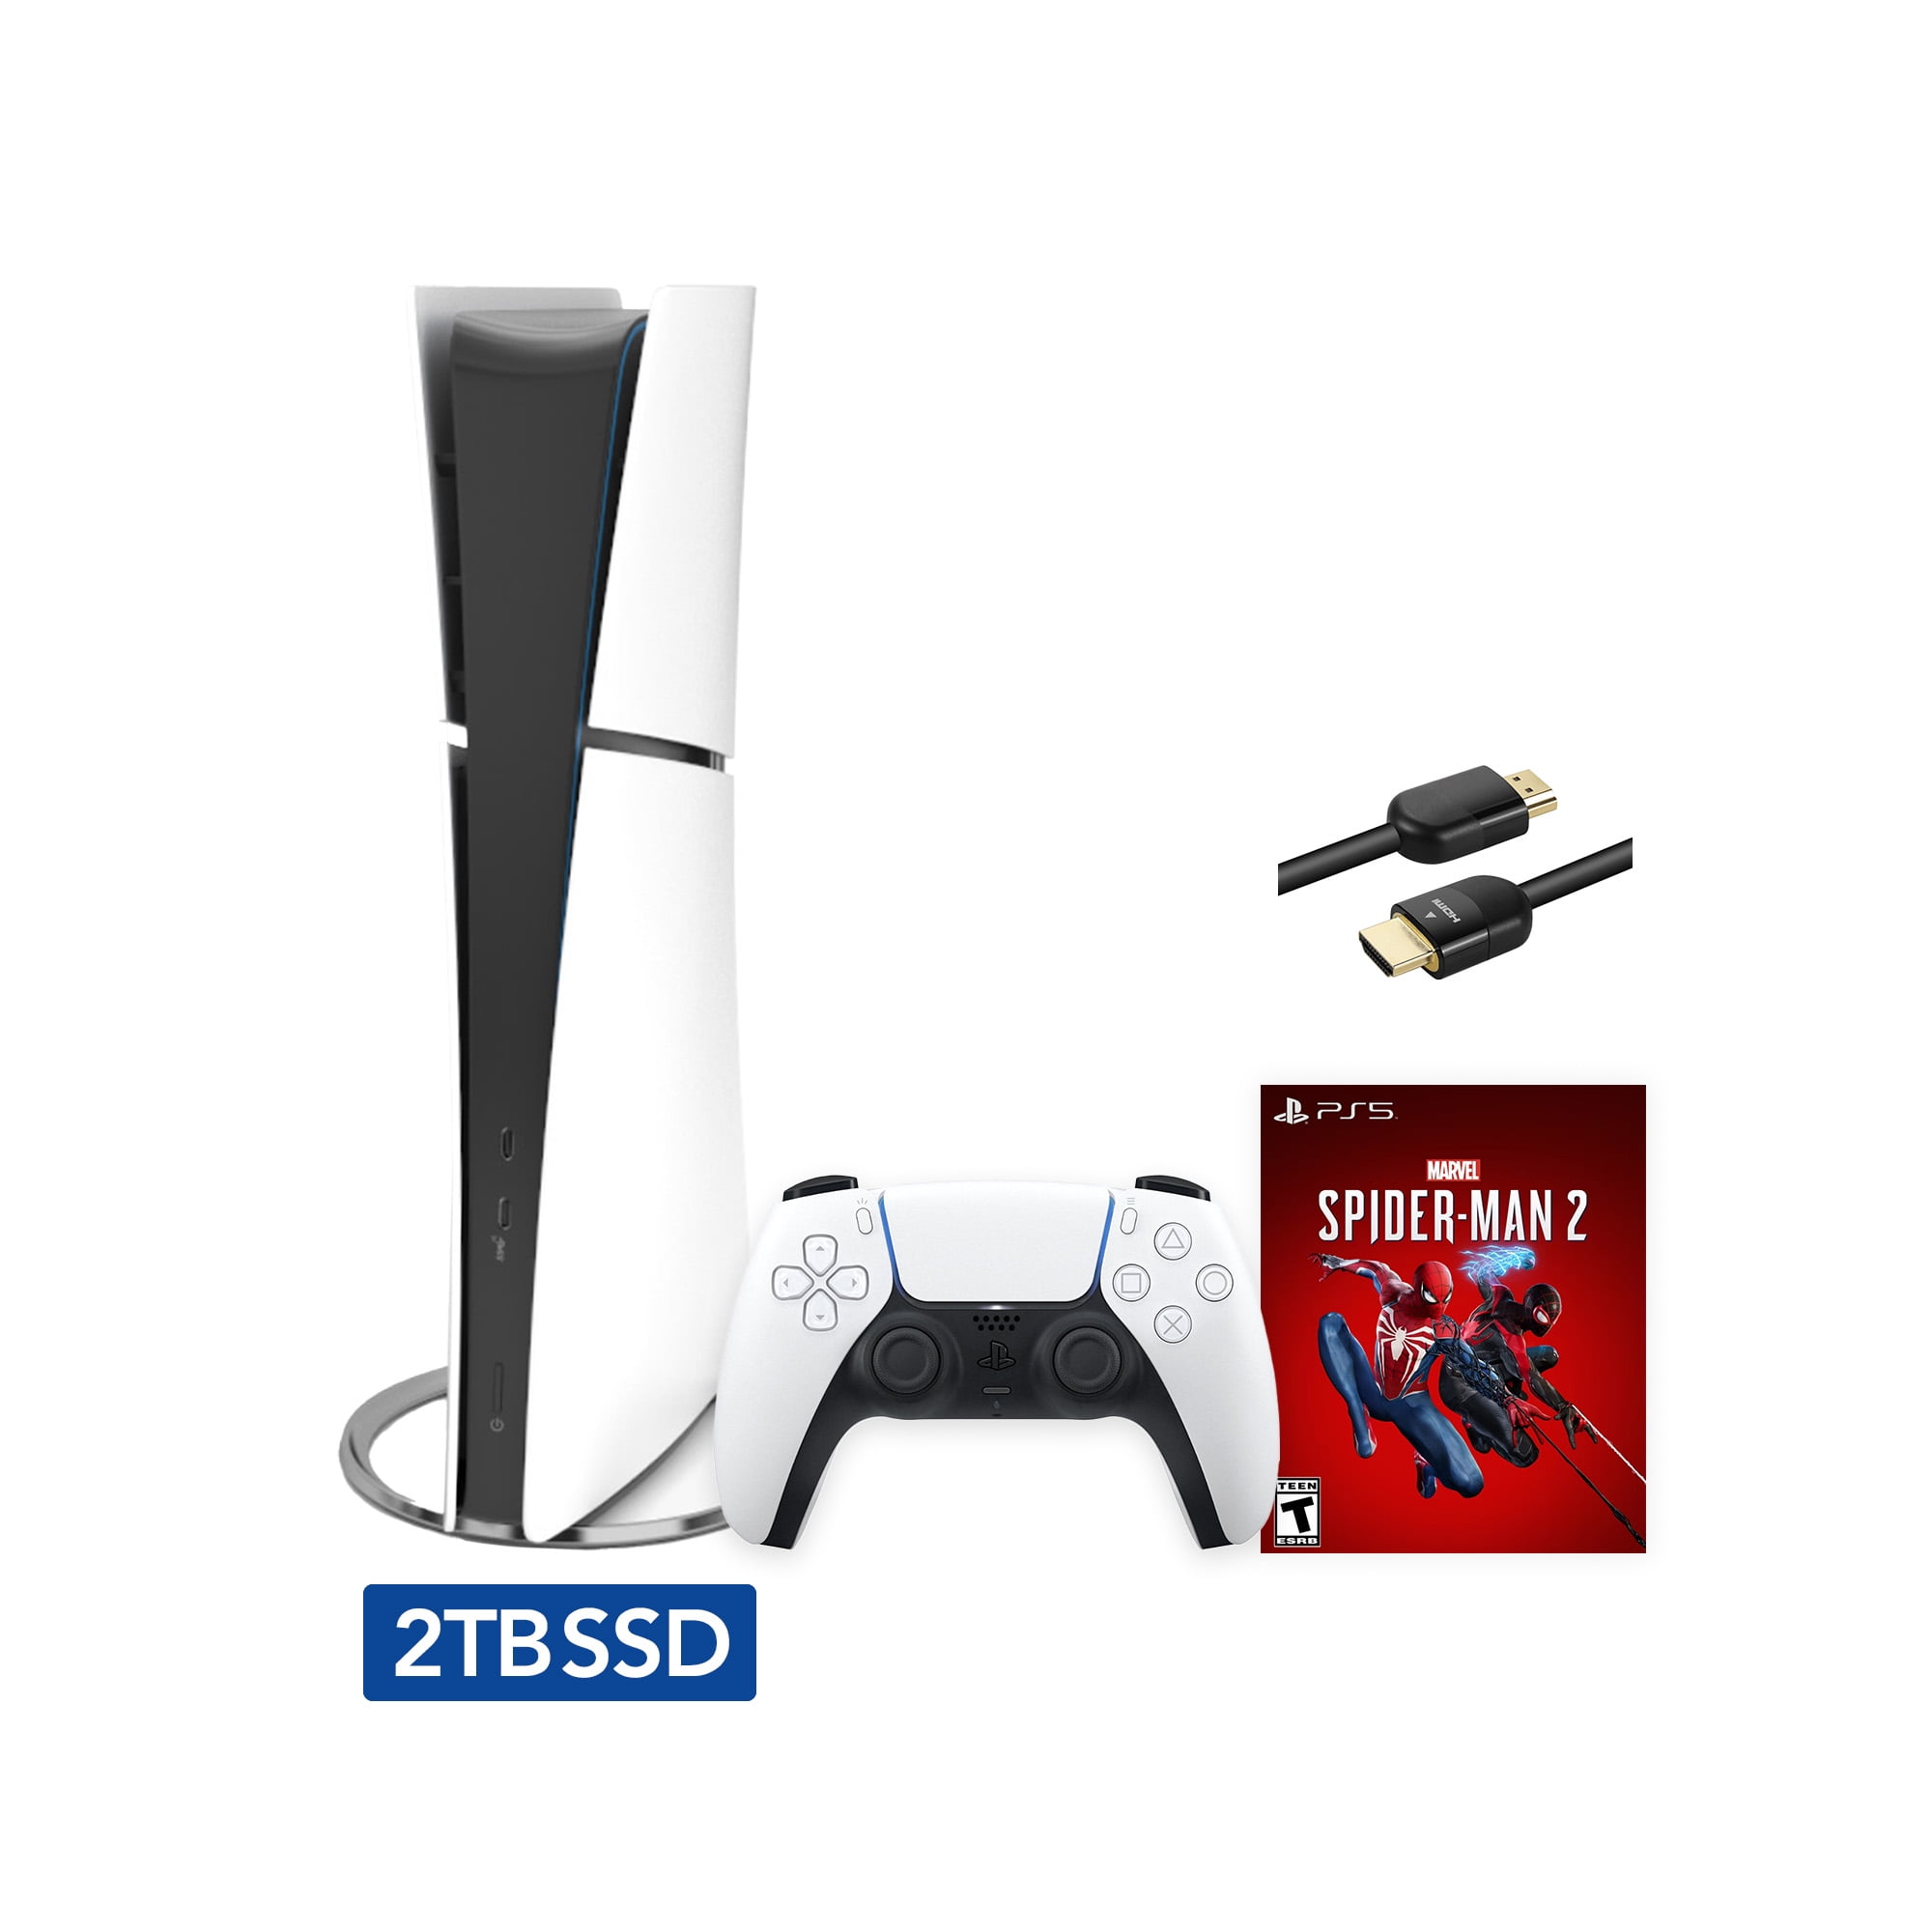 2023 New PlayStation 5 Slim Upgraded 2TB Digital Edition Spider-Man 2  Bundle and Mytrix 8K HDMI Ultra High Speed Cable - White, Slim PS5 2TB PCIe  SSD 